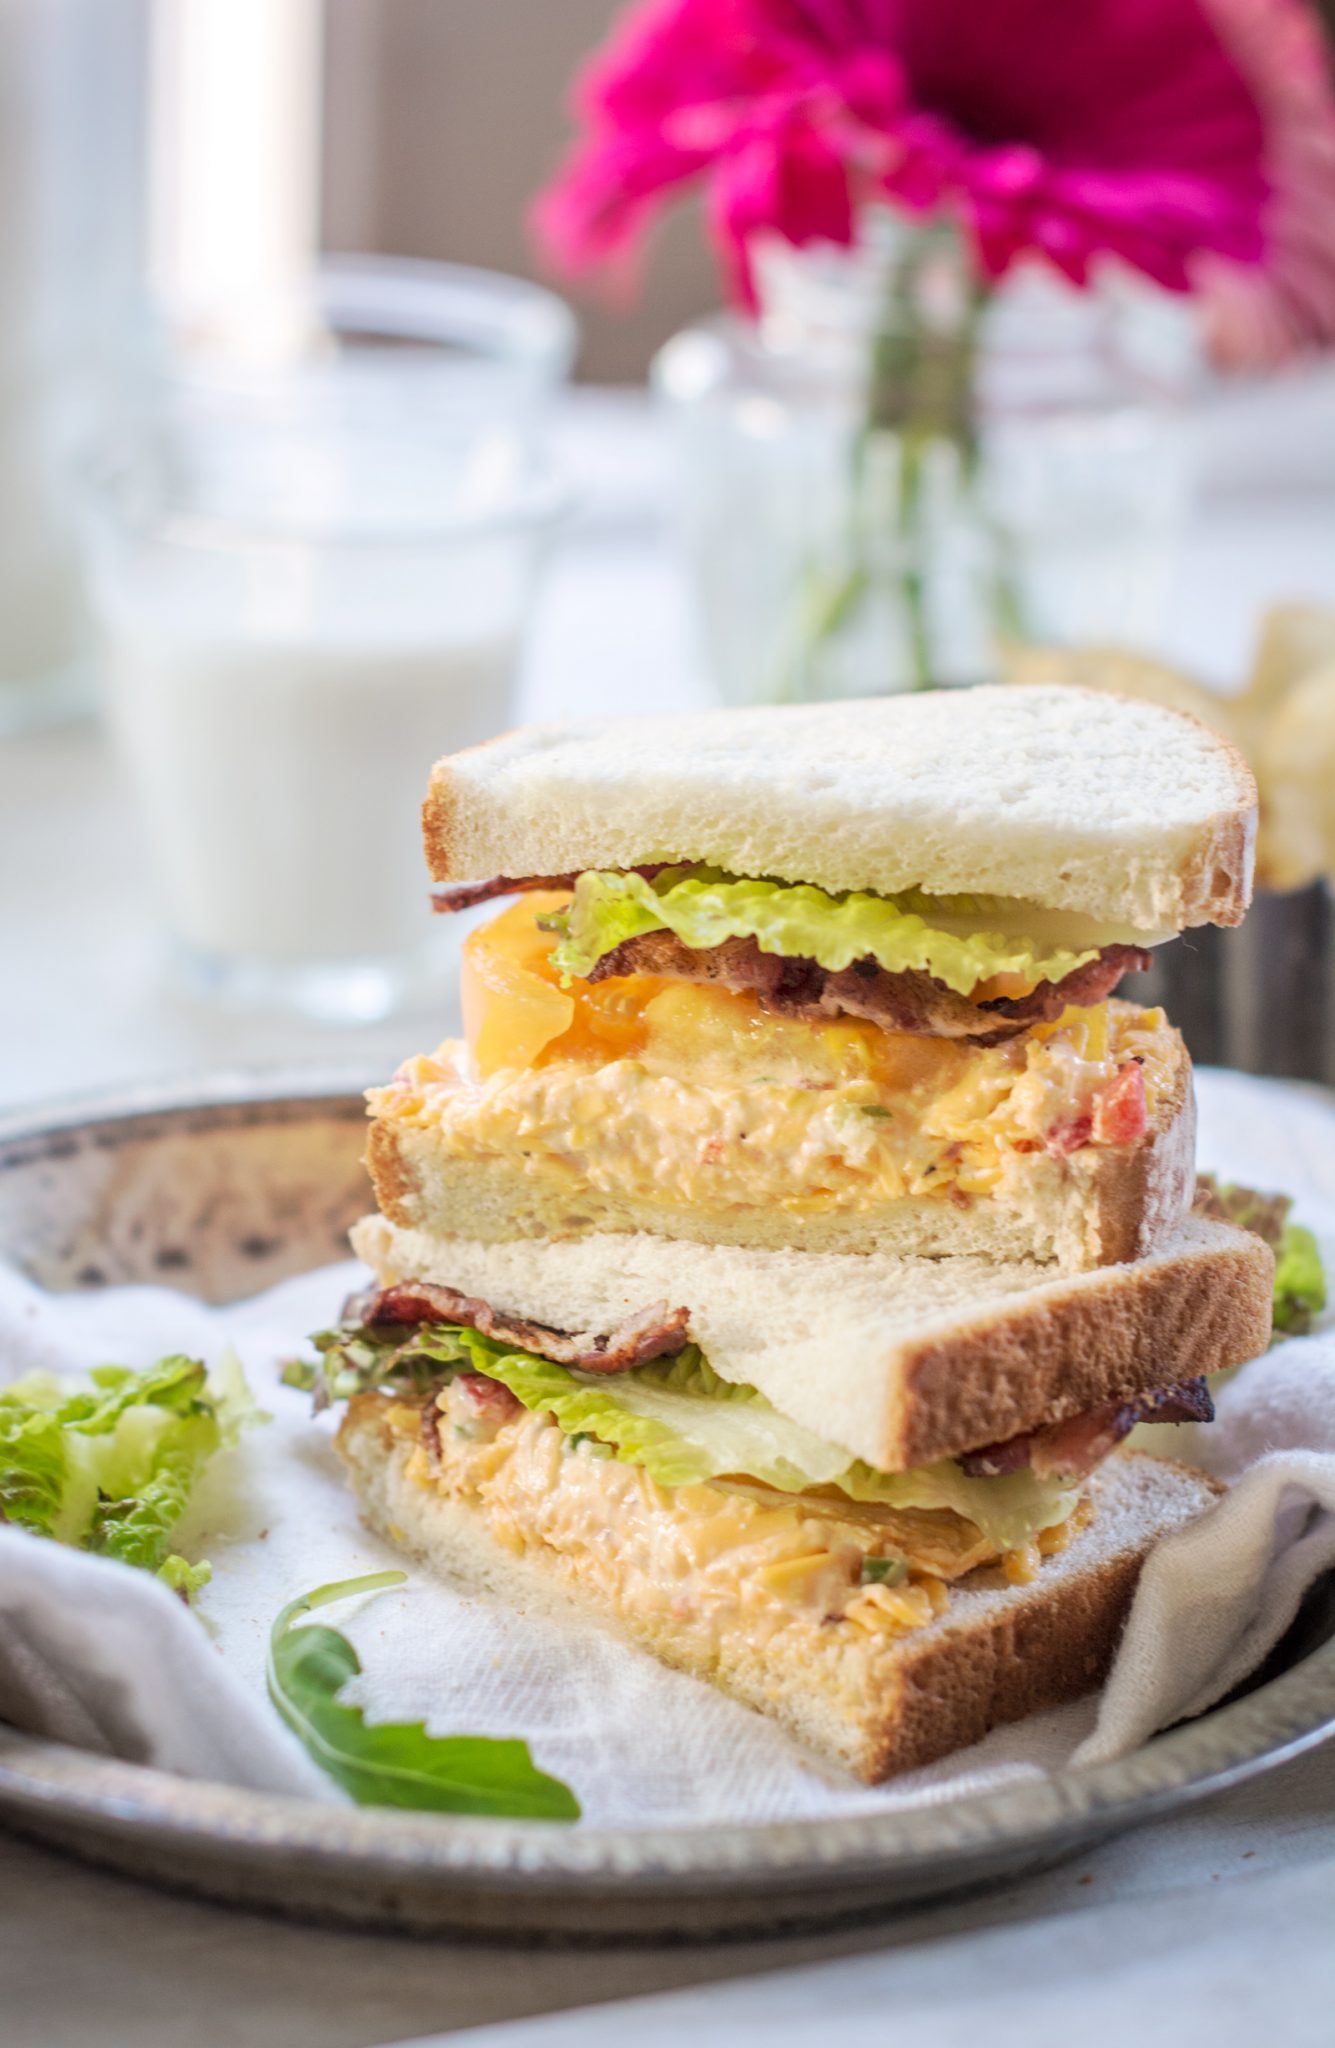 A stacked sandwich on Pepperidge Farm hearty white bread with pimiento cheese, bacon, lettuce and tomatoes.